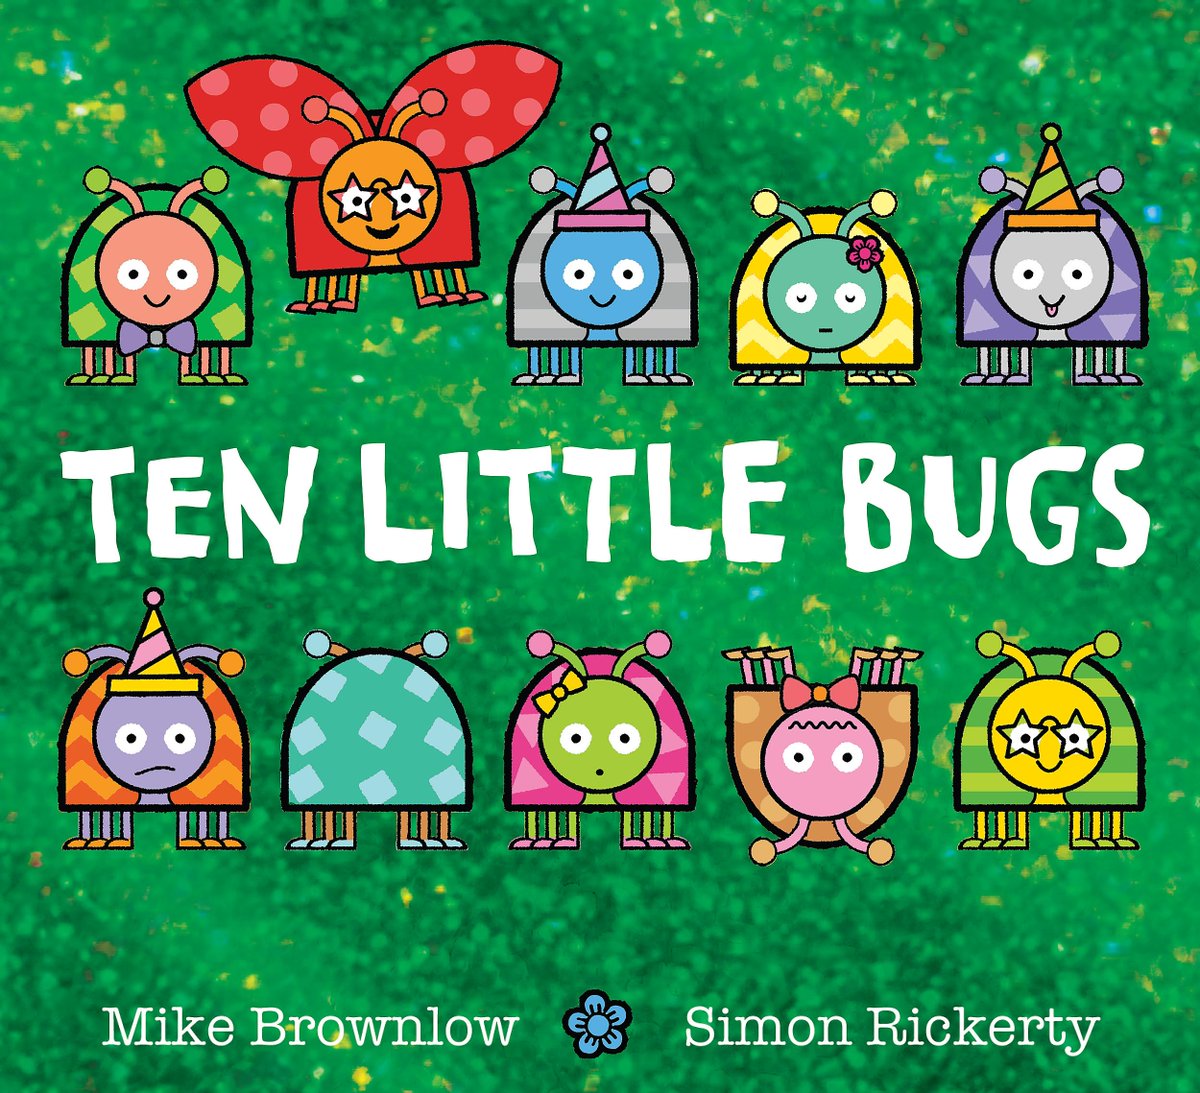 Happy Publication Day to Ten Little Bugs, the latest in the joyful Ten Littles series illustrated by @SimonRickerty and written by @MikeBrownlow1! Out now in paperback from @HachetteKids 🪲